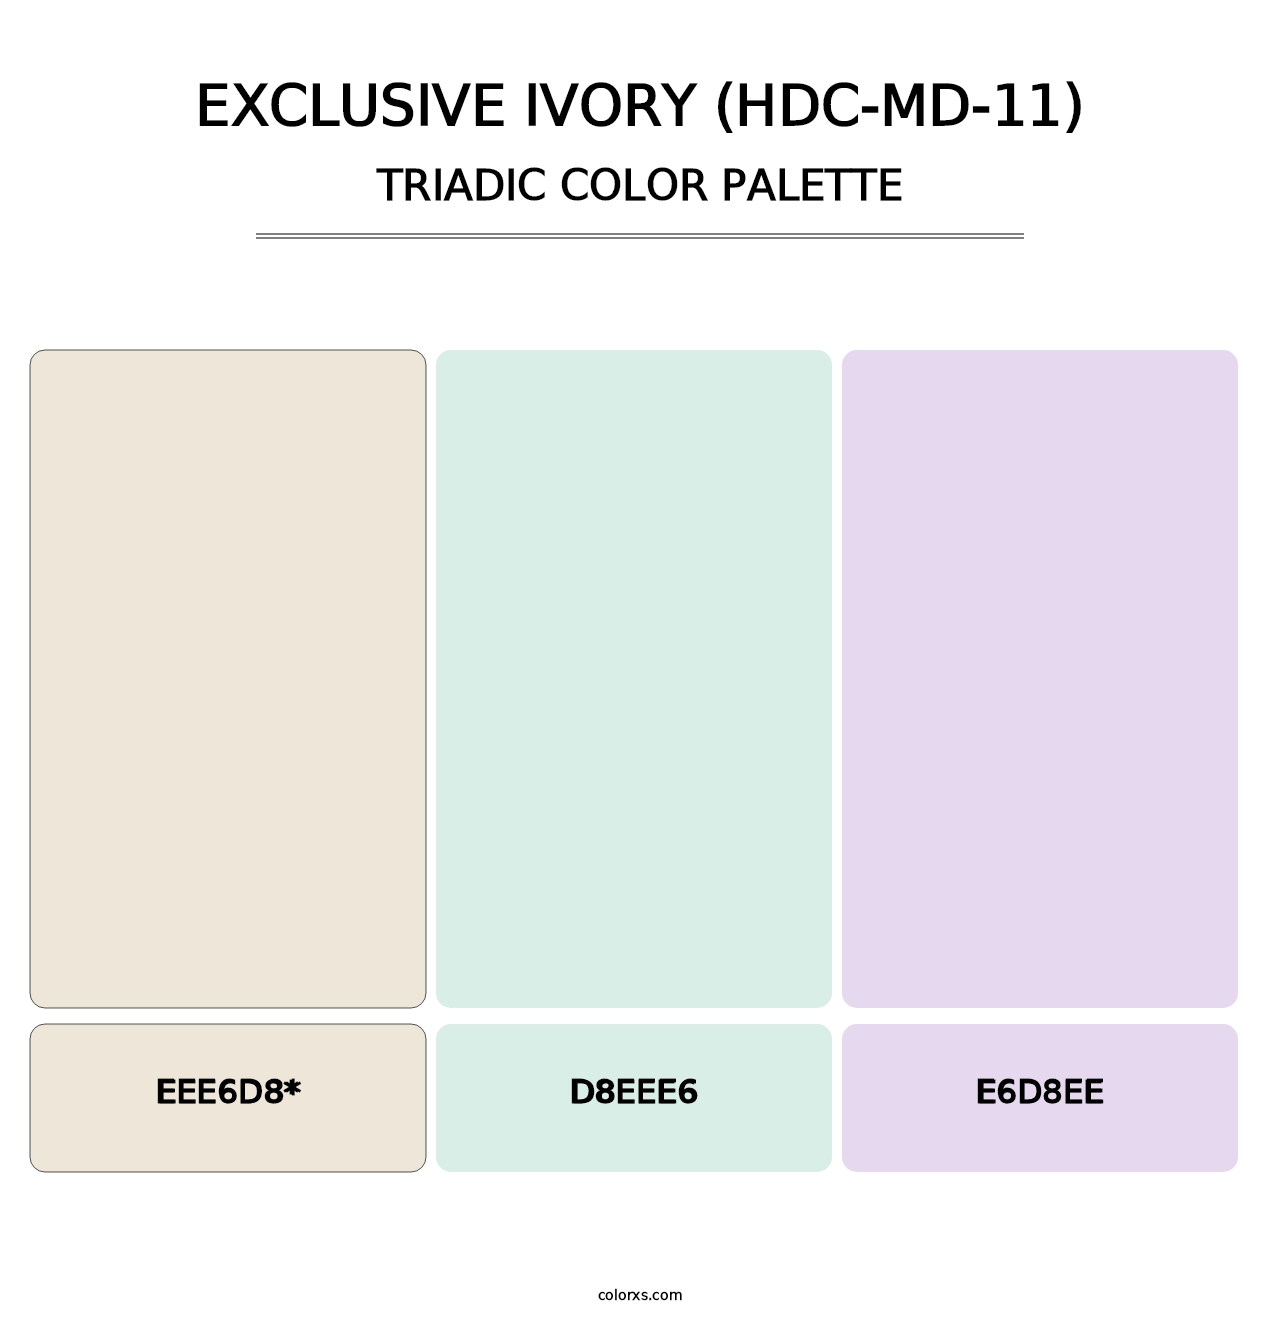 Exclusive Ivory (HDC-MD-11) - Triadic Color Palette